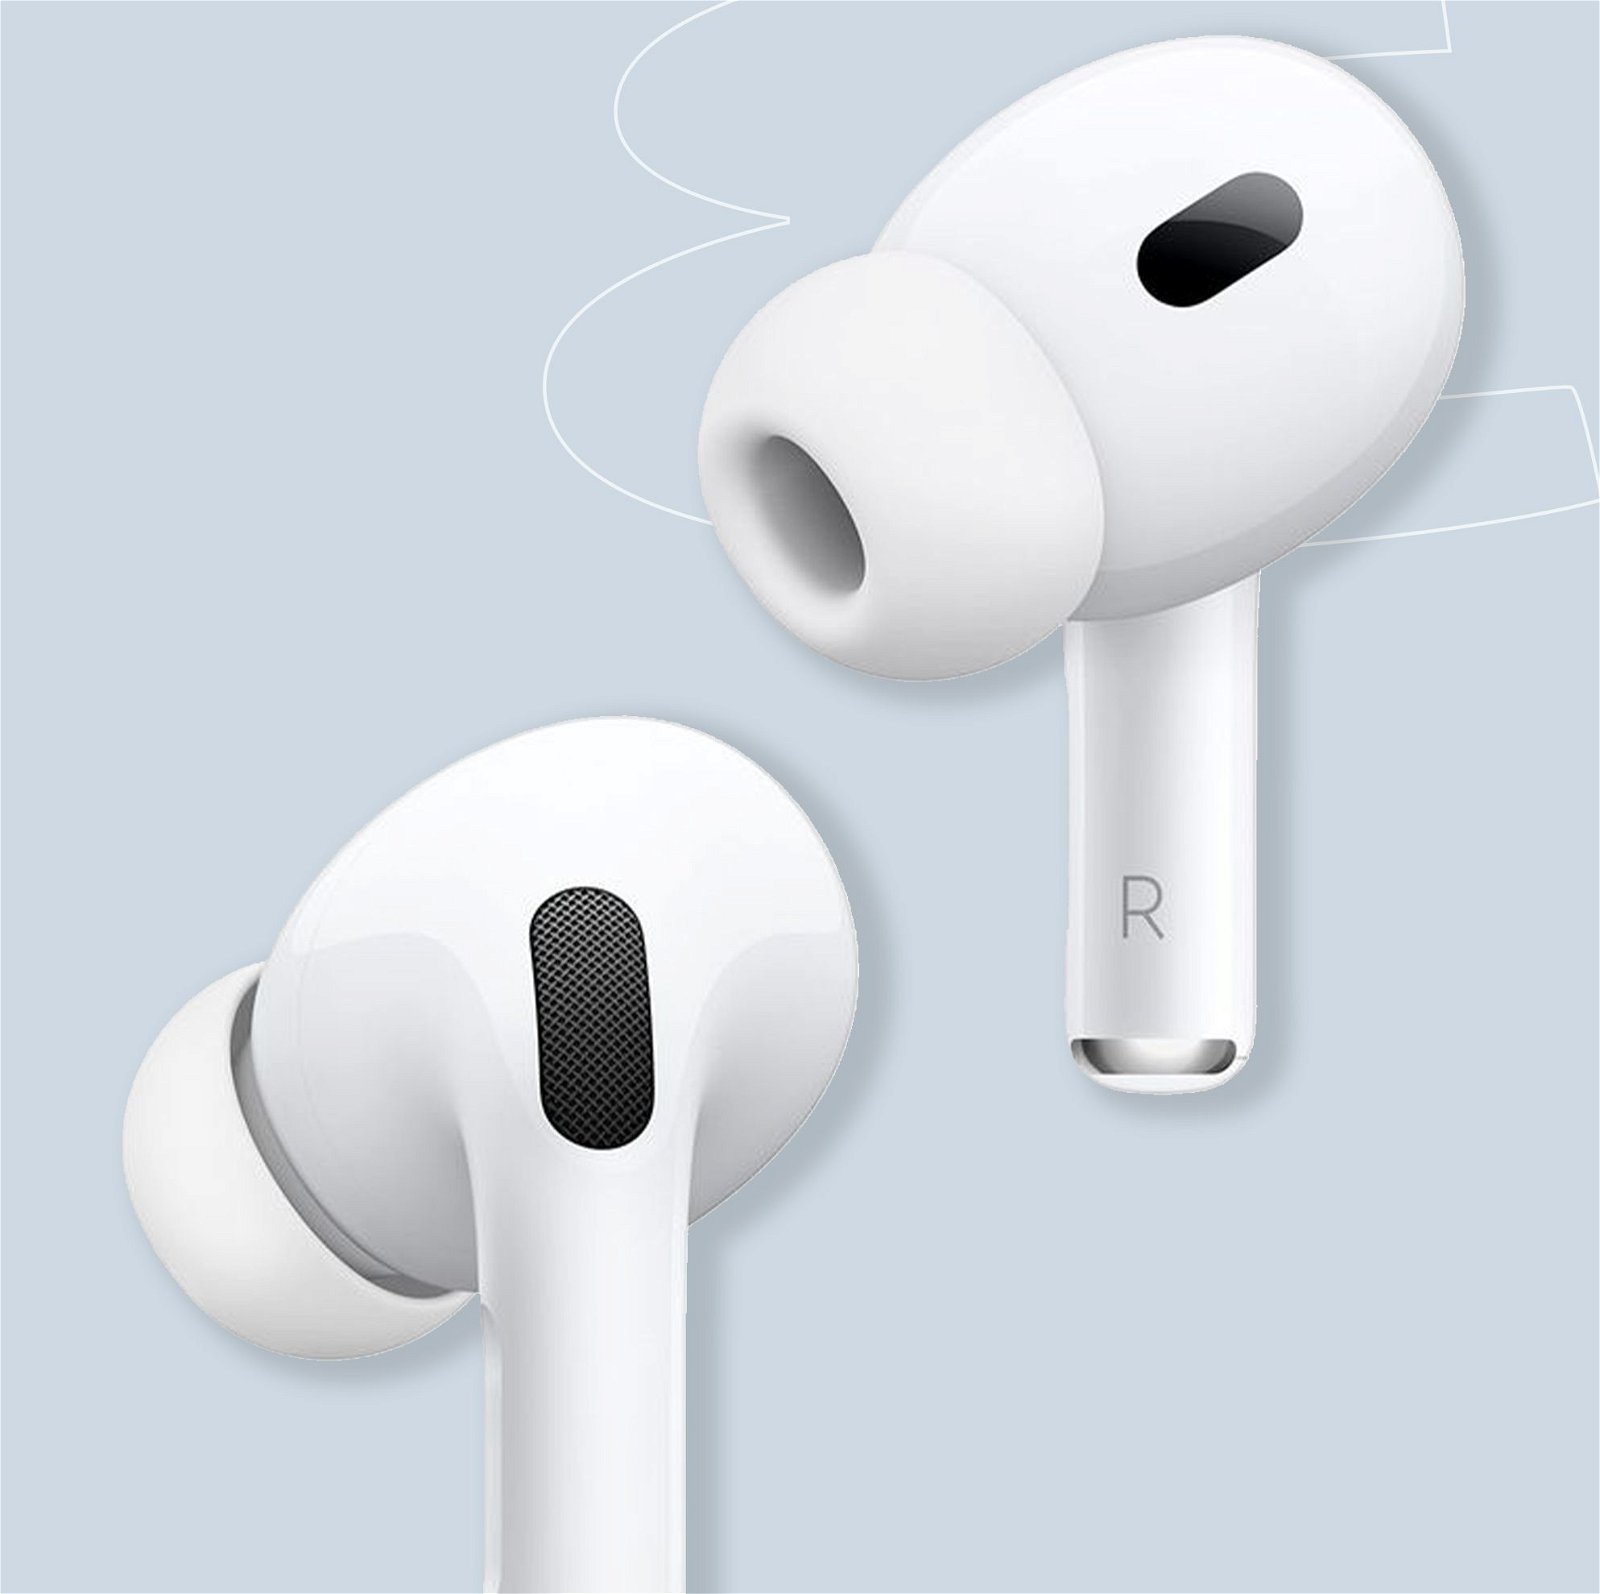 A Full Breakdown on Every AirPods Model